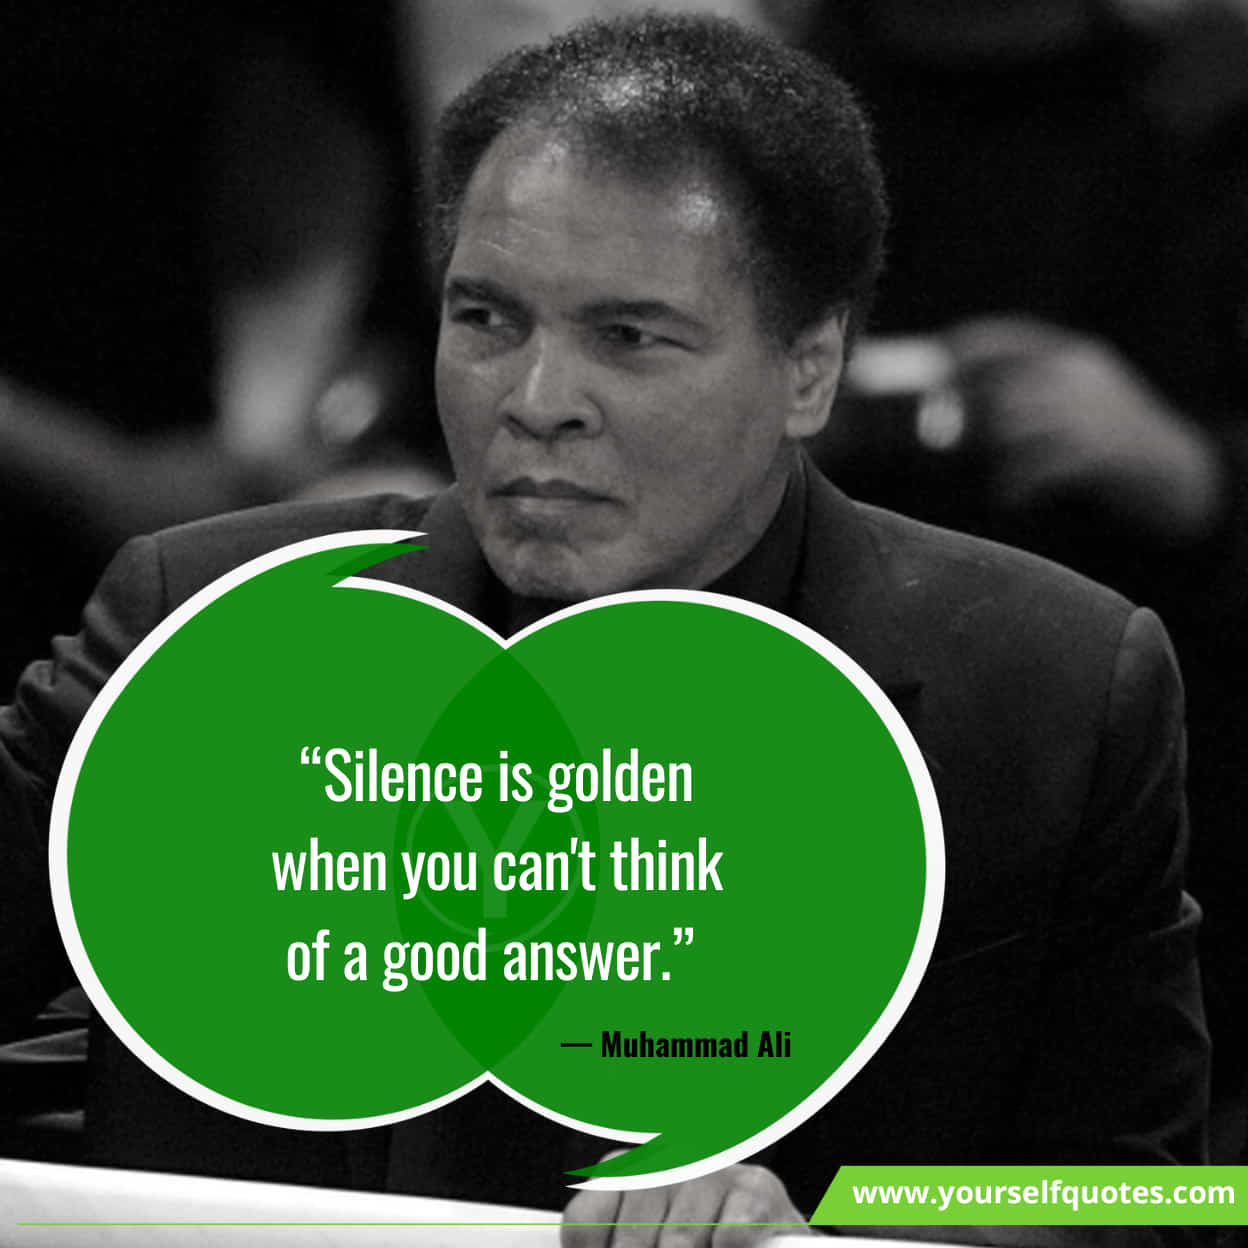 Muhammad Ali Quotes That Will Make You A Fighter